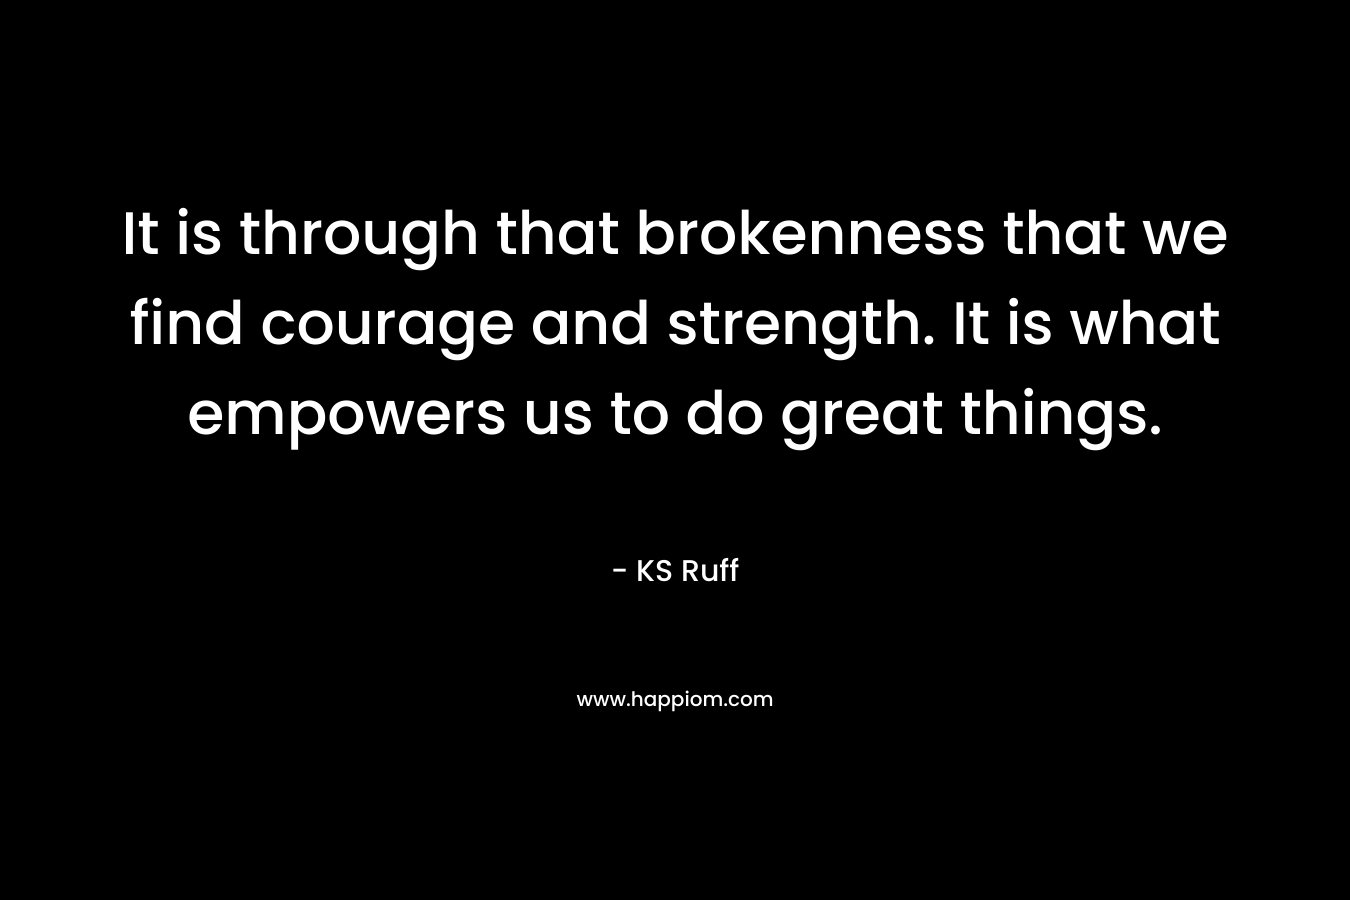 It is through that brokenness that we find courage and strength. It is what empowers us to do great things. – KS Ruff